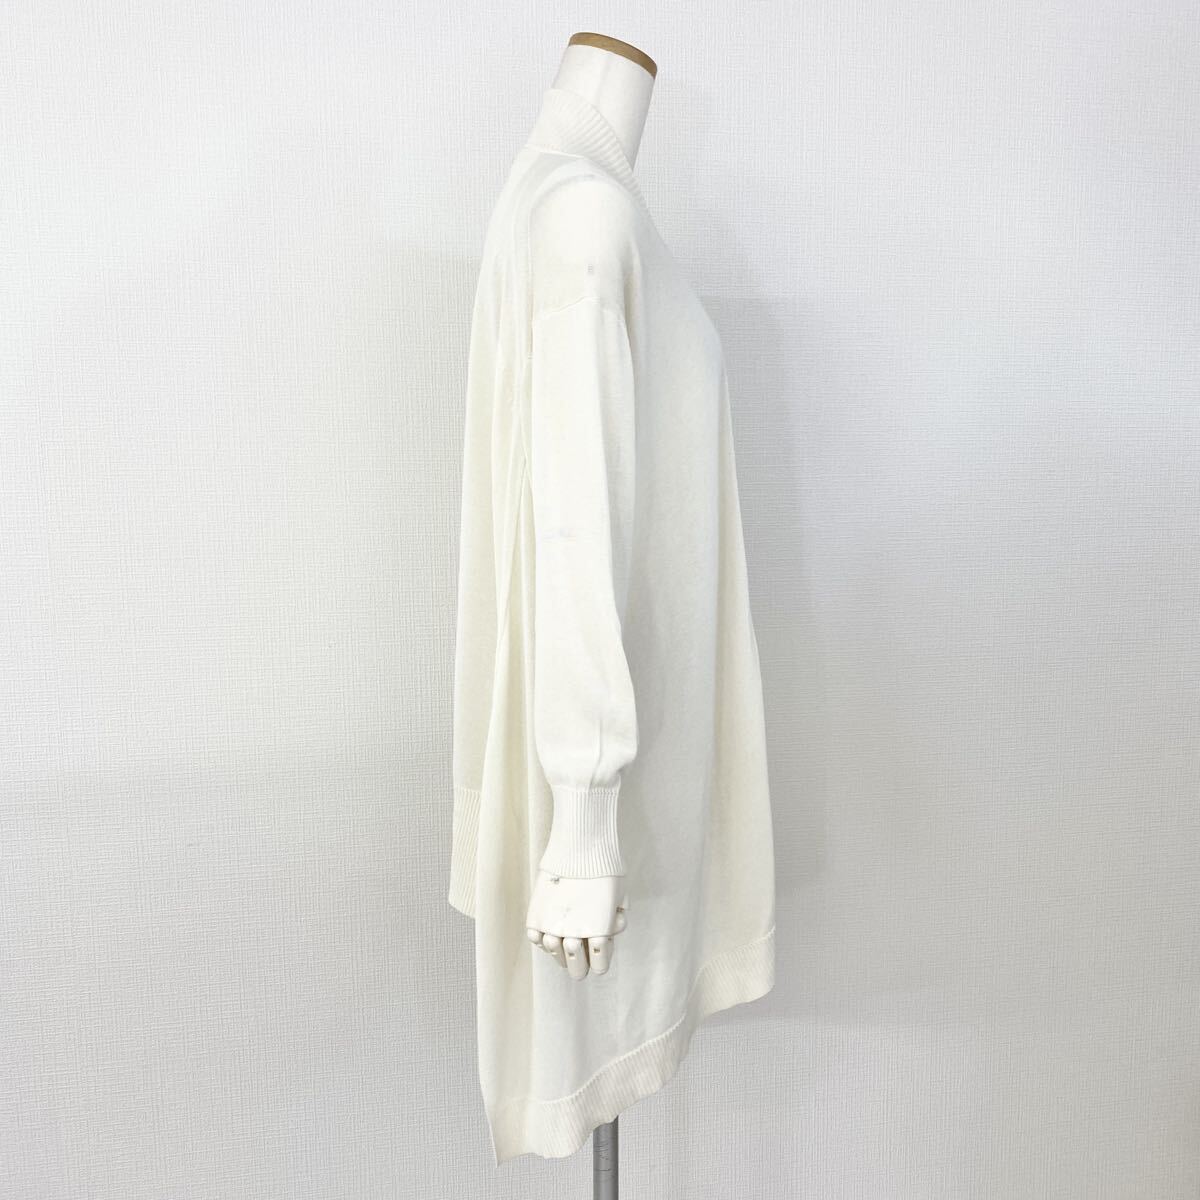 Wc20 EPOCA Epoca long cardigan size 40 eggshell white plain lady's knitted cardigan front opening rib tops feather woven thin 